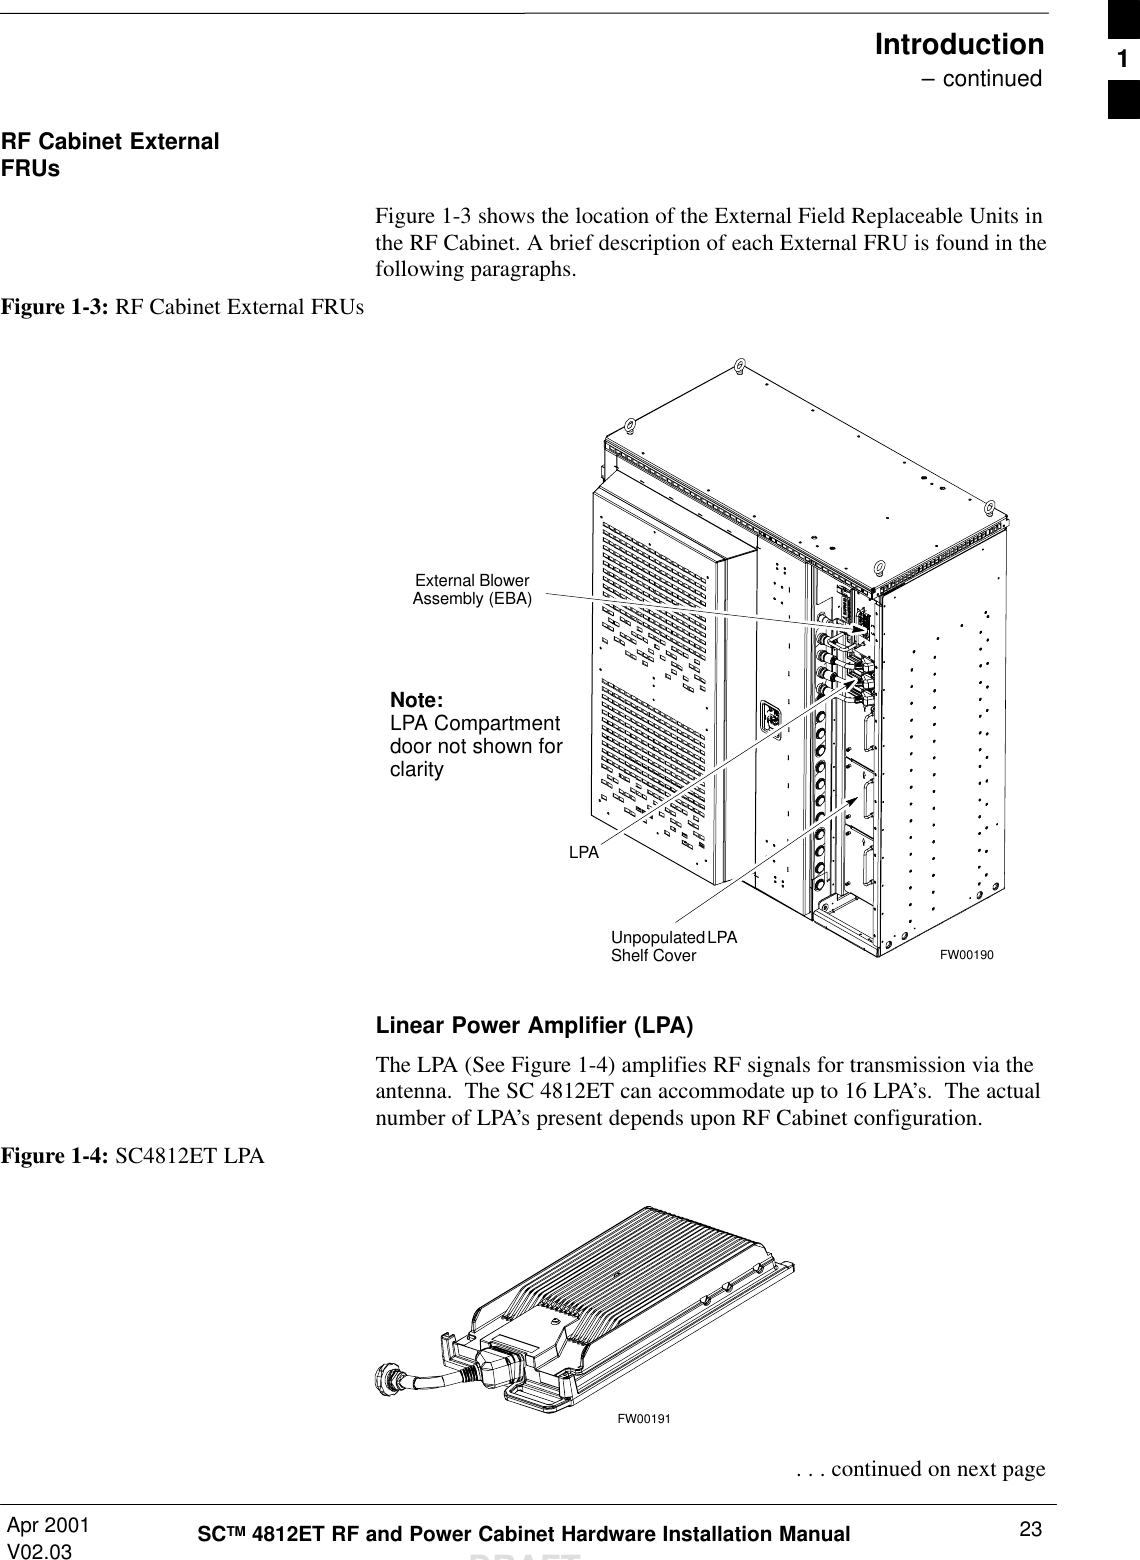 Introduction – continuedApr 2001V02.03 23SCTM 4812ET RF and Power Cabinet Hardware Installation ManualDRAFTRF Cabinet ExternalFRUsFigure 1-3 shows the location of the External Field Replaceable Units inthe RF Cabinet. A brief description of each External FRU is found in thefollowing paragraphs.Figure 1-3: RF Cabinet External FRUsUnpopulated LPAShelf CoverLPAExternal BlowerAssembly (EBA)Note:LPA Compartmentdoor not shown forclarityFW00190Linear Power Amplifier (LPA)The LPA (See Figure 1-4) amplifies RF signals for transmission via theantenna.  The SC 4812ET can accommodate up to 16 LPA’s.  The actualnumber of LPA’s present depends upon RF Cabinet configuration.Figure 1-4: SC4812ET LPAFW00191 . . . continued on next page1